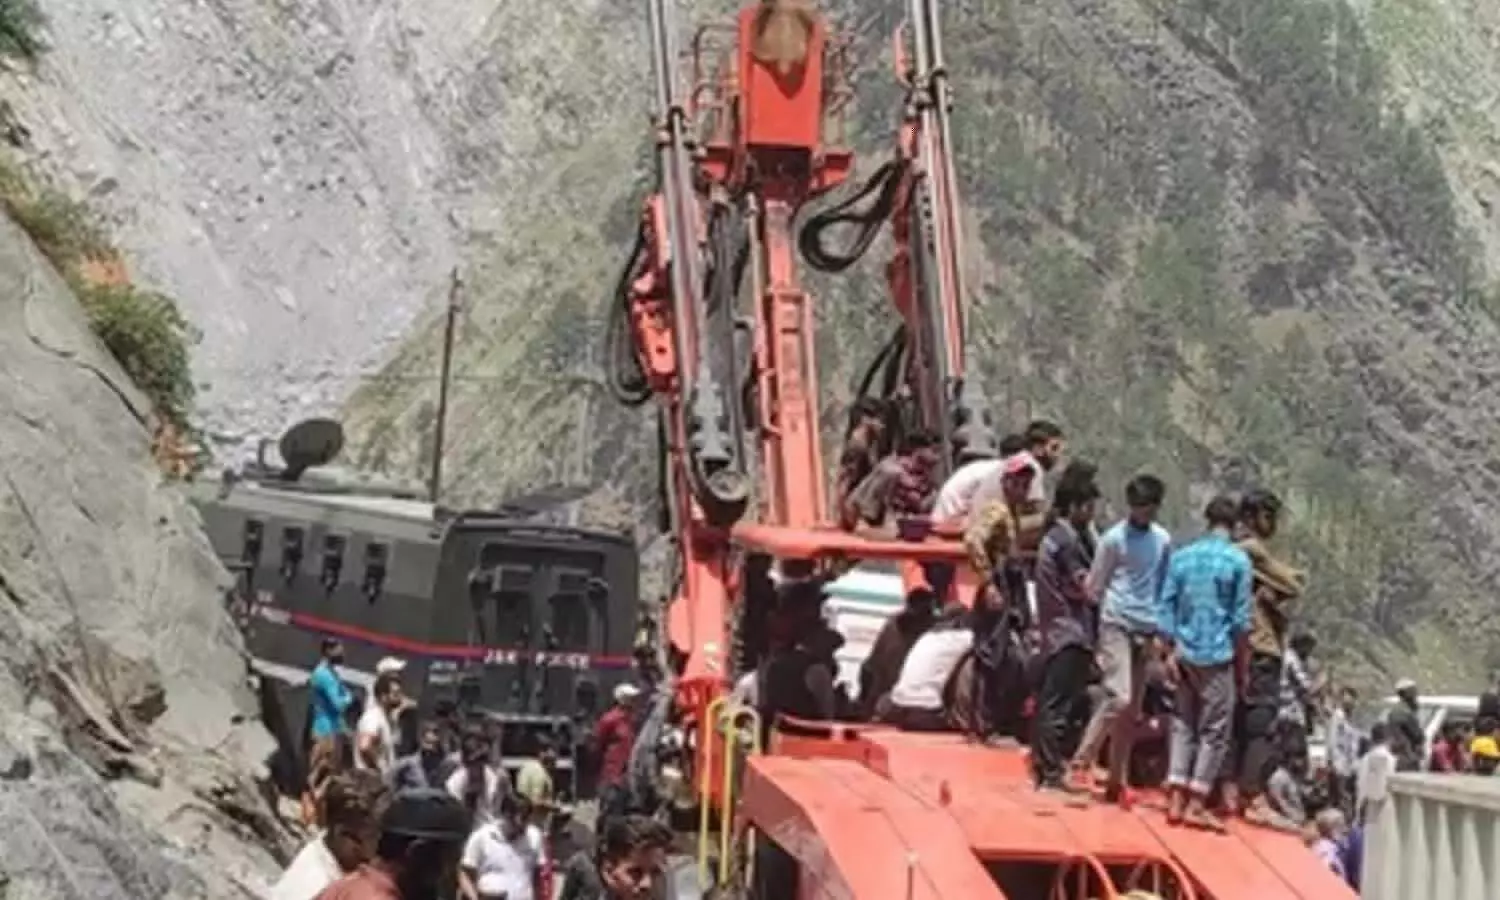 Third day of rescue operation in Ramban, bodies of all the workers removed, case filed against the construction company